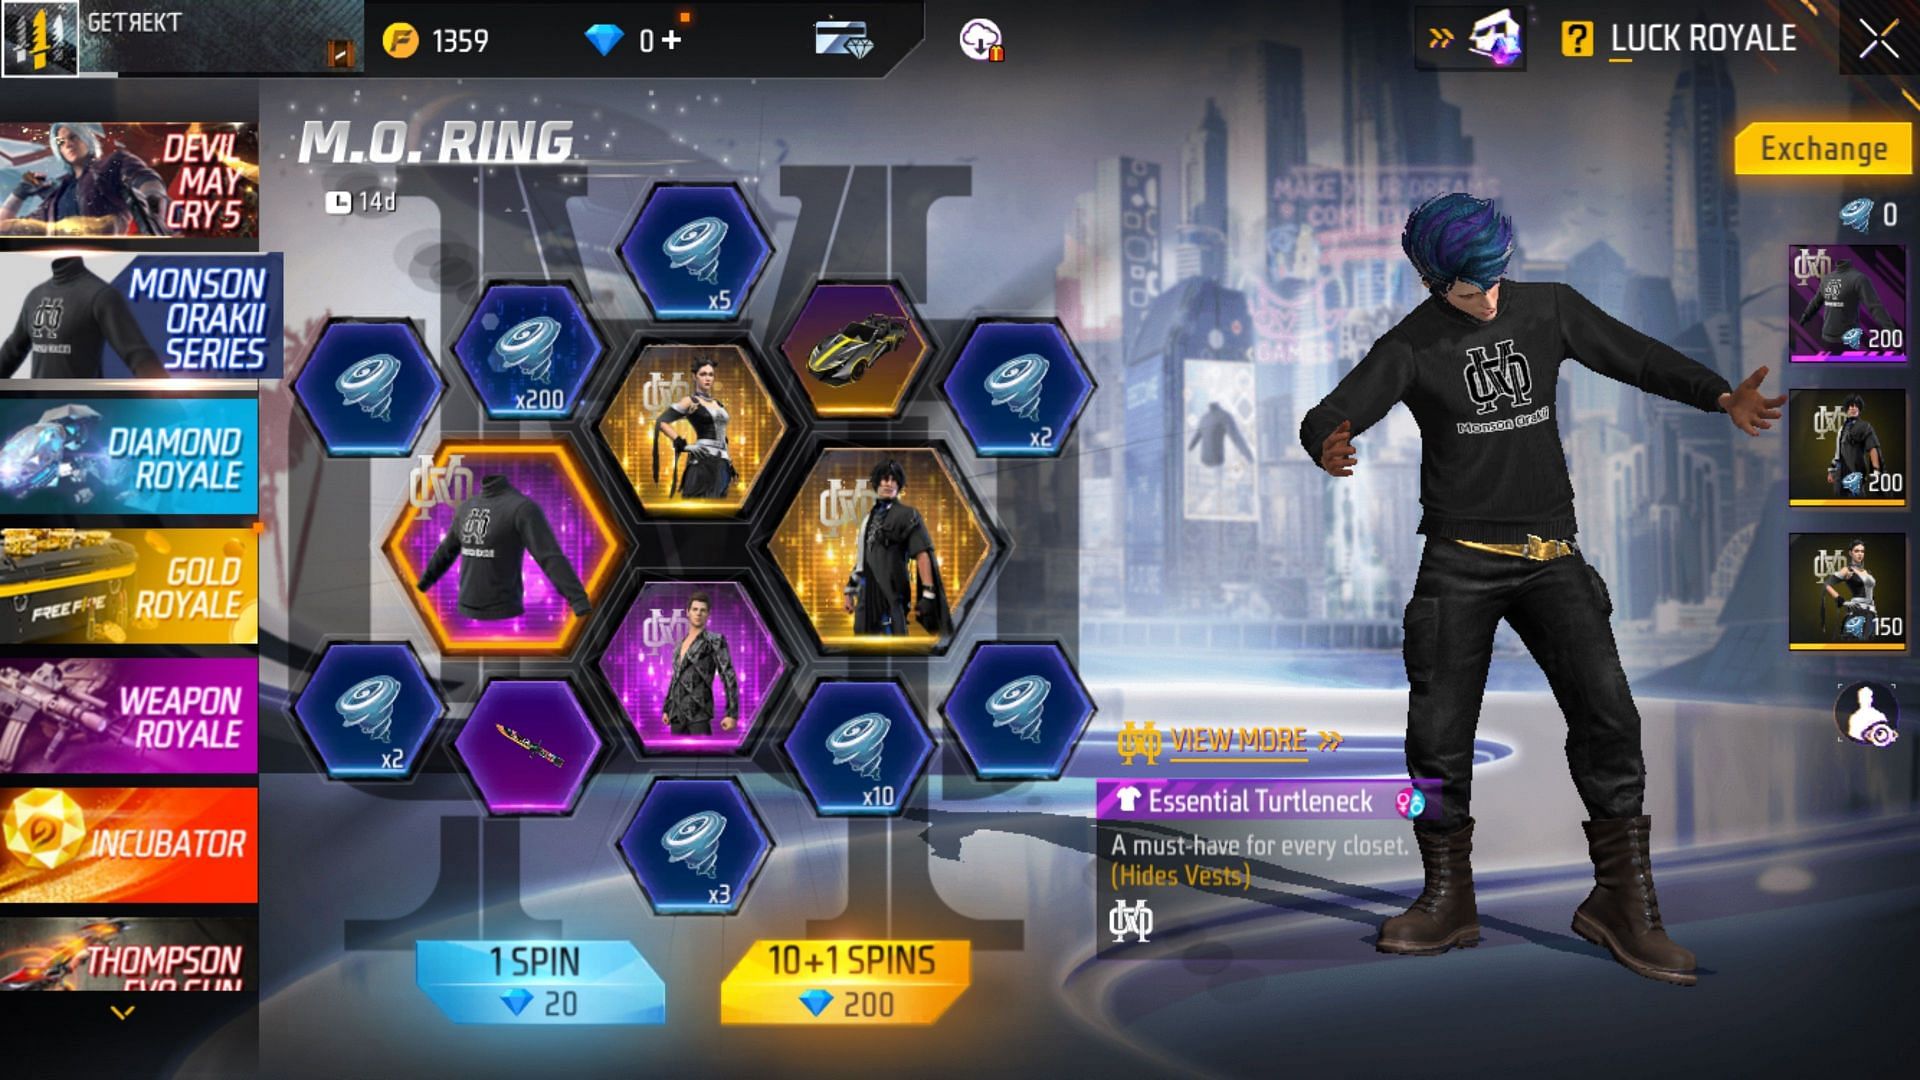 Spend diamonds and make the spins in the M.O Ring event (Image via Garena)